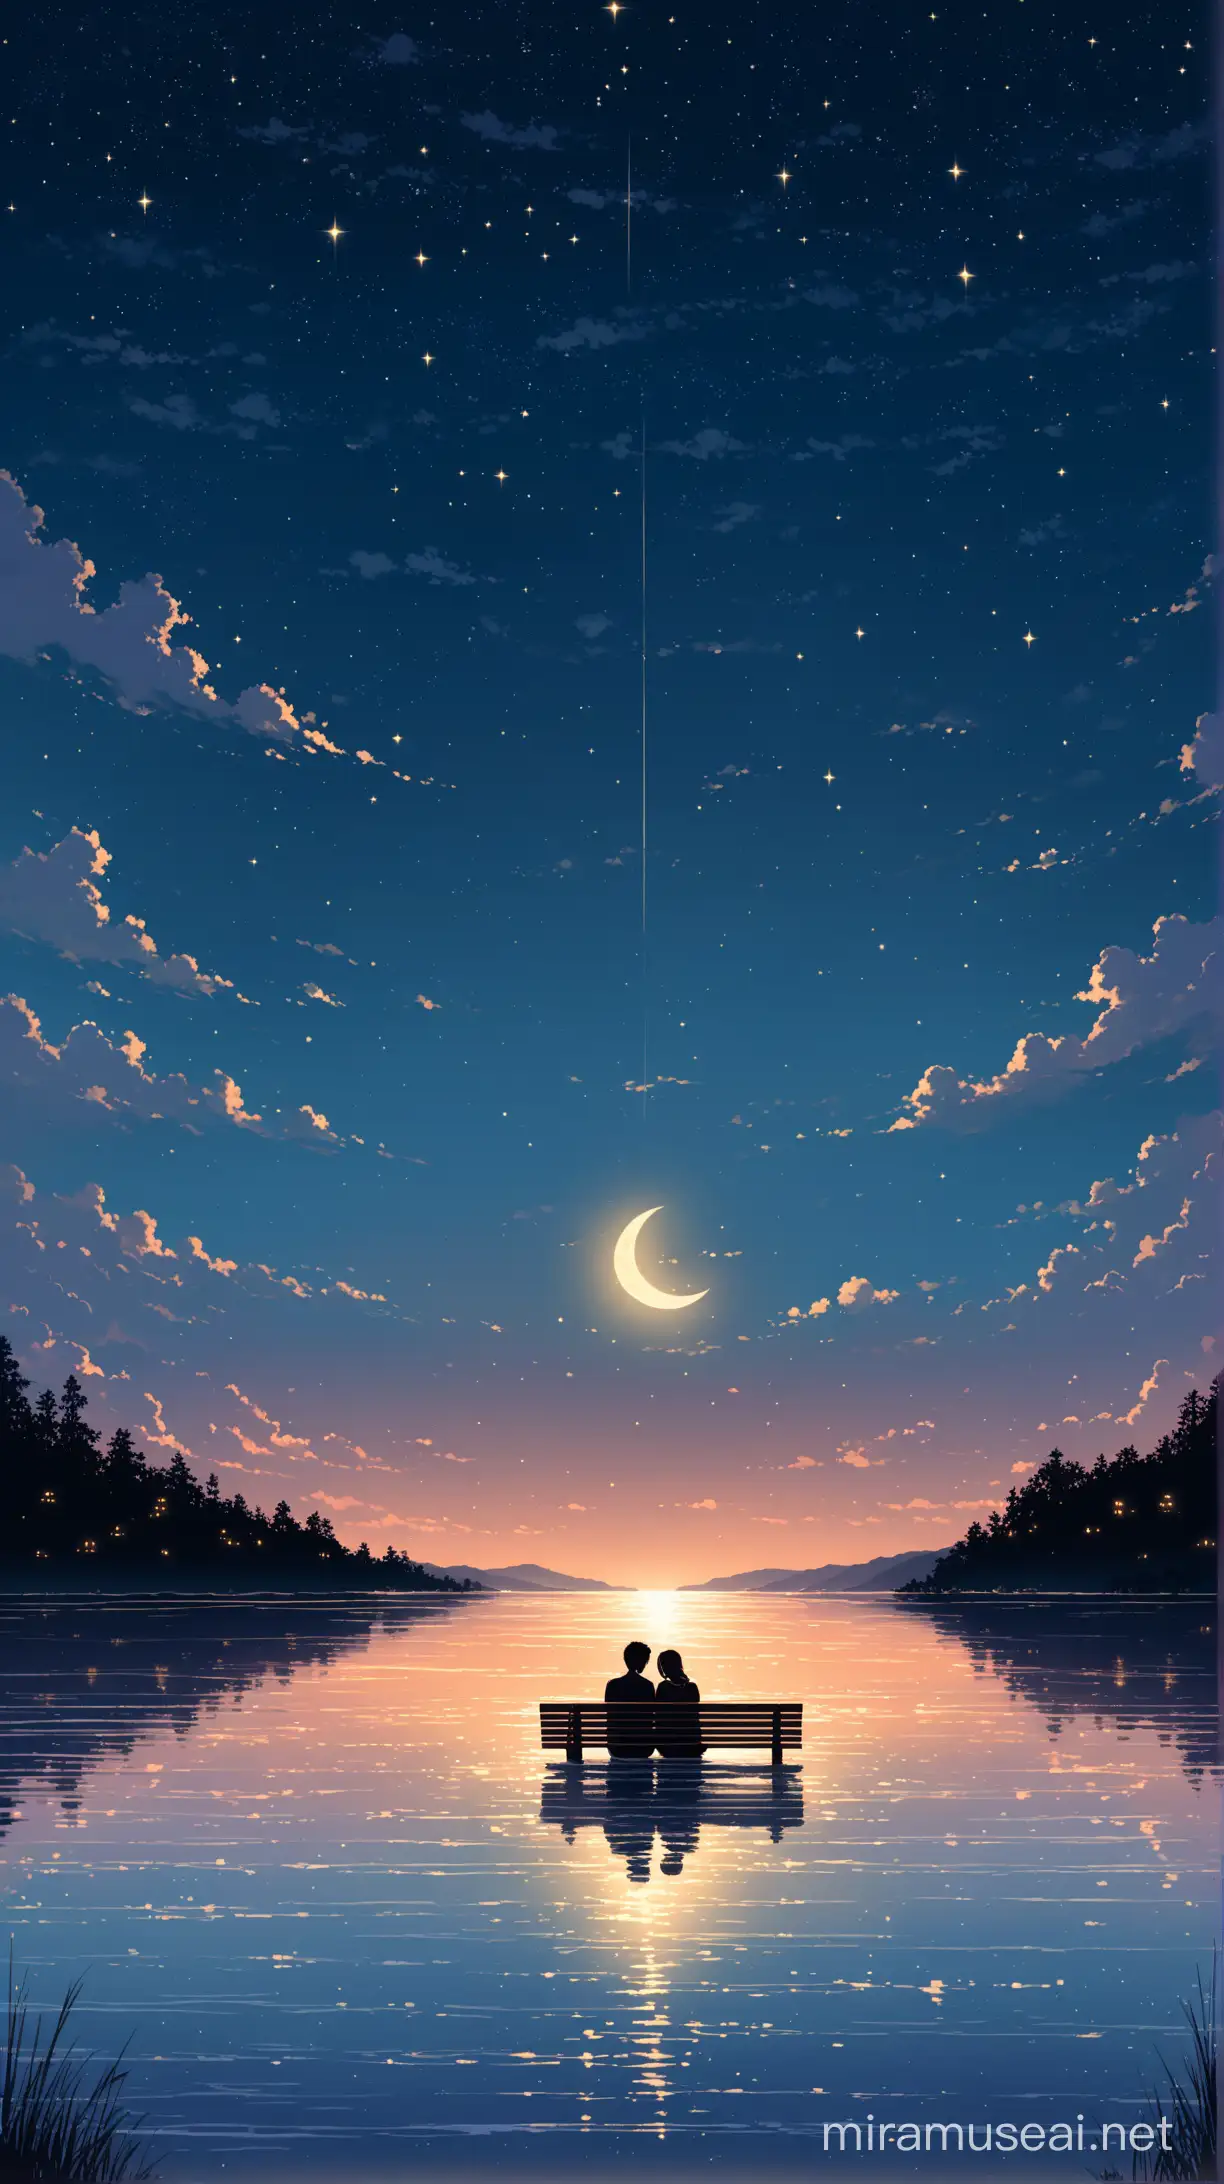 Imagine a tranquil lakeside scene bathed in the soft glow of a crescent moon. In the distance, a boy and girl sit on a weathered bench, their silhouettes defined against the shimmering water. They lean against each other, lost in the moment, as they gaze up at the star-studded sky above. The sketch should convey a sense of serenity and intimacy, with the couple's love palpable amidst the peaceful nighttime setting.